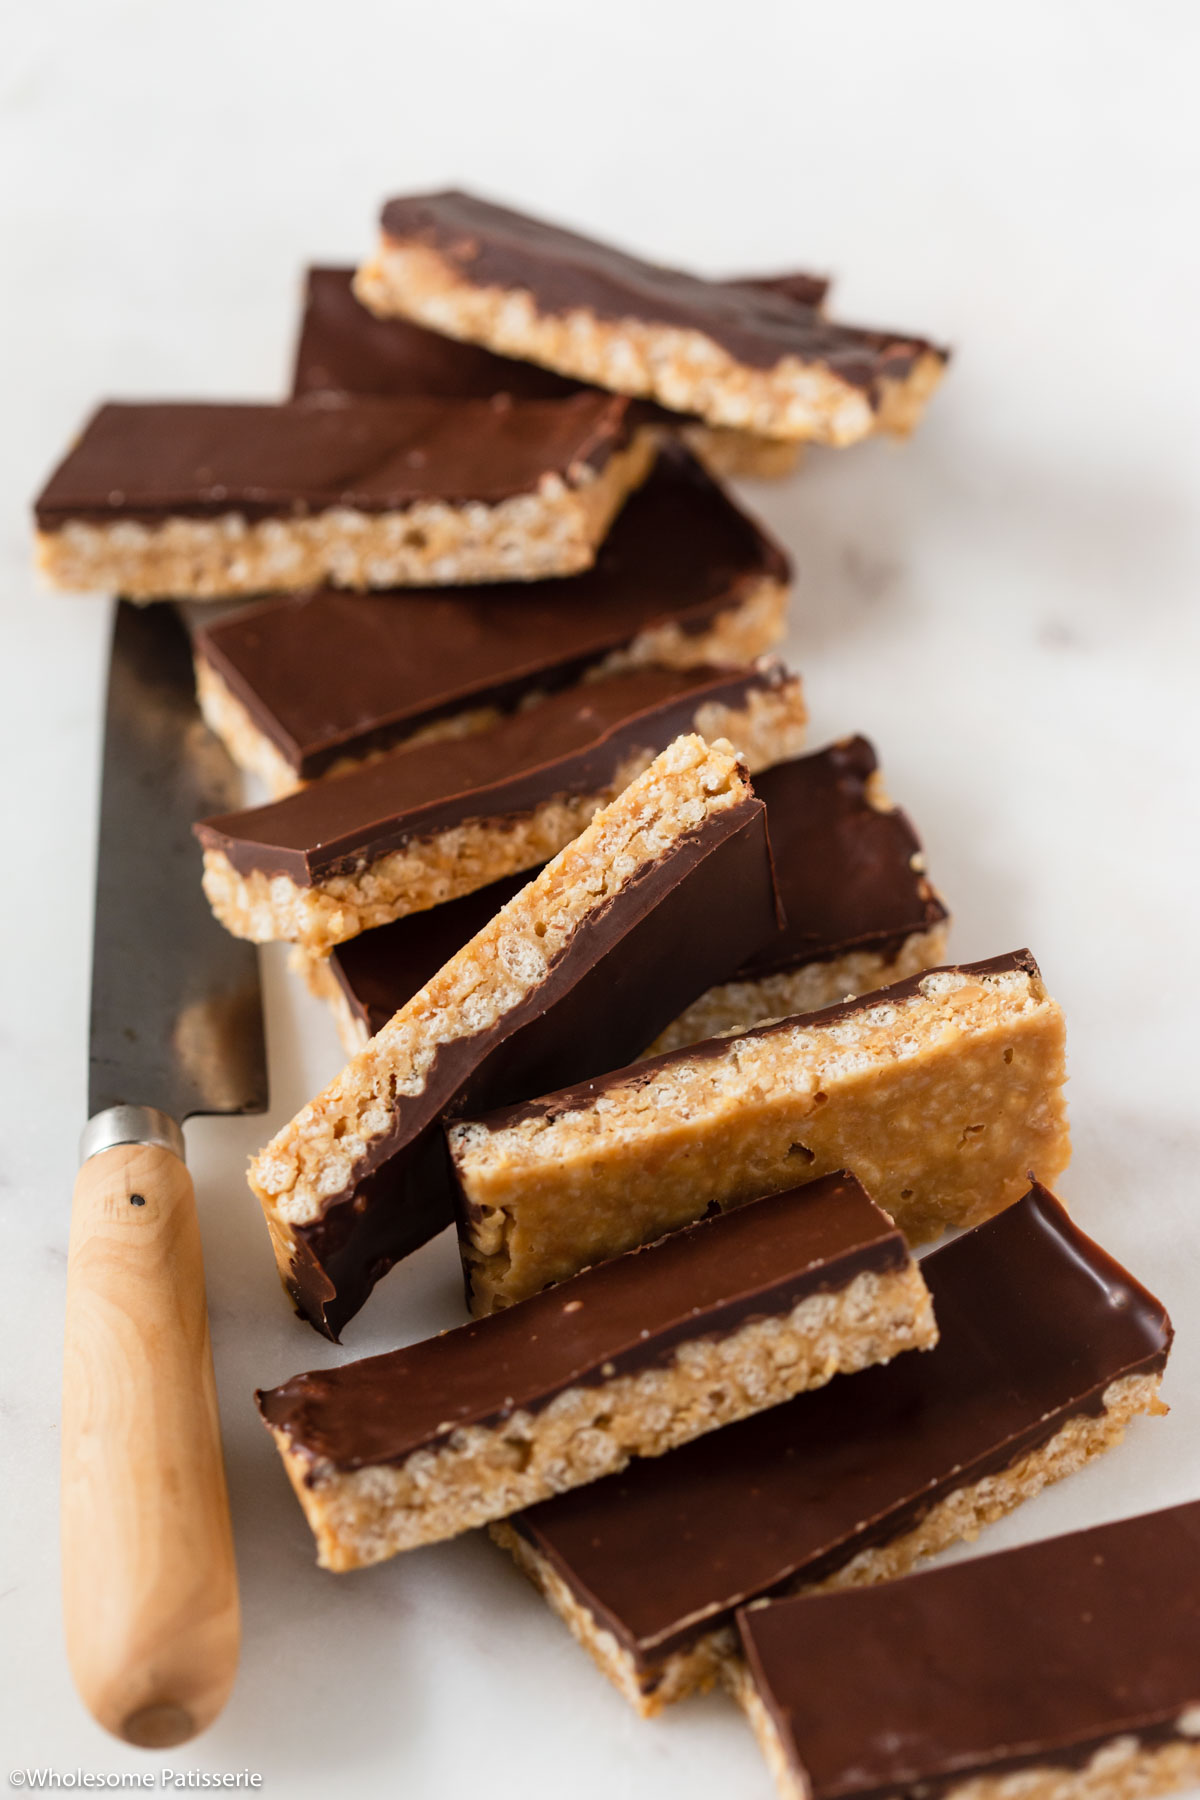 Crunch bars cut into linger bars and stacked together on a platter next to a decorative knife.